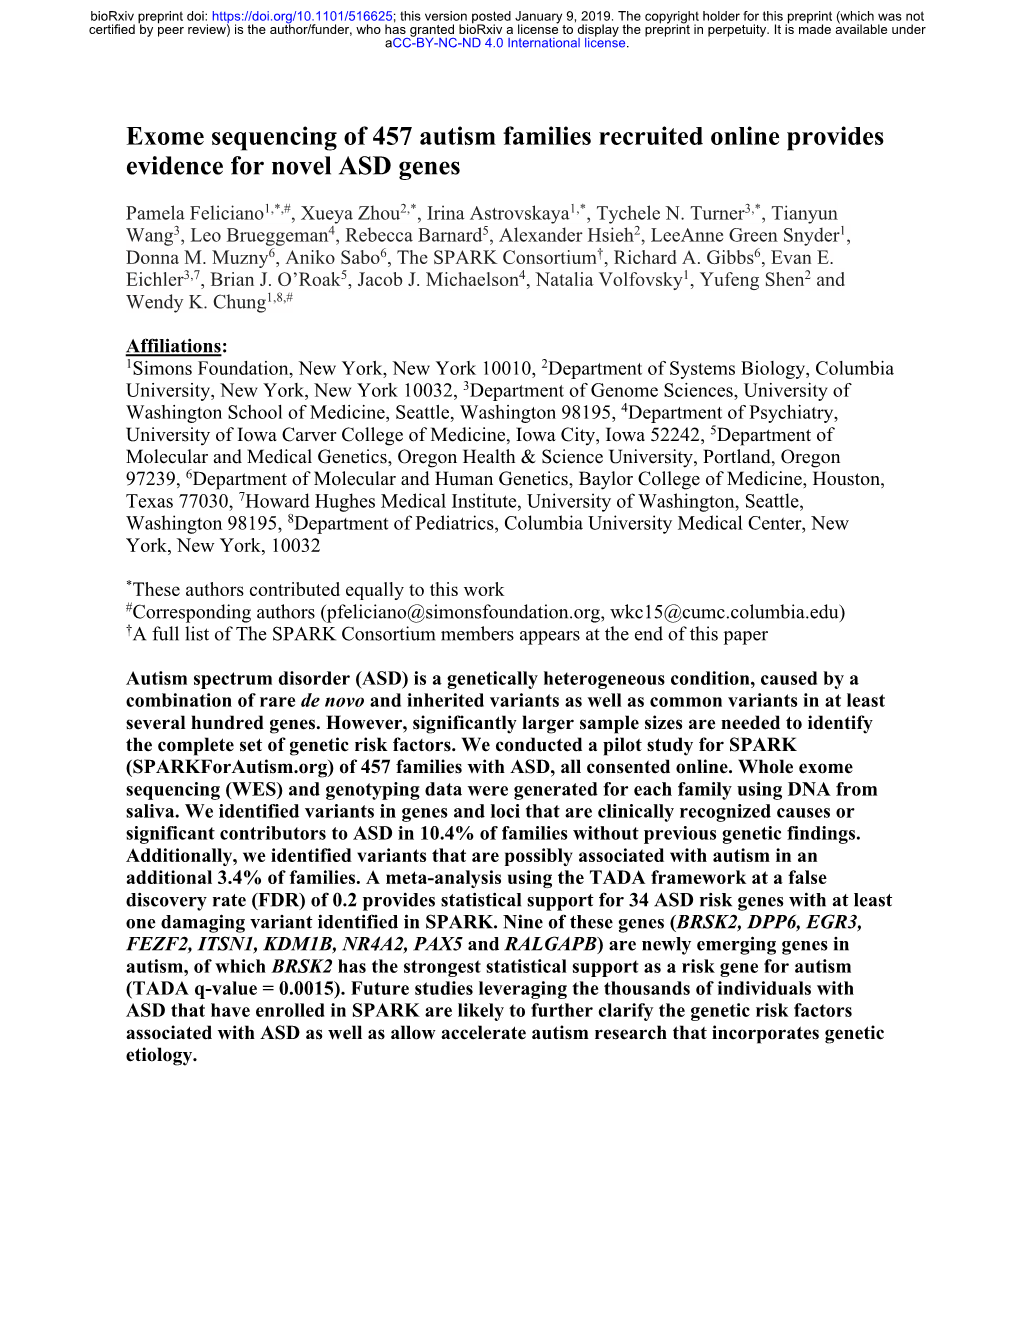 Exome Sequencing of 457 Autism Families Recruited Online Provides Evidence for Novel ASD Genes